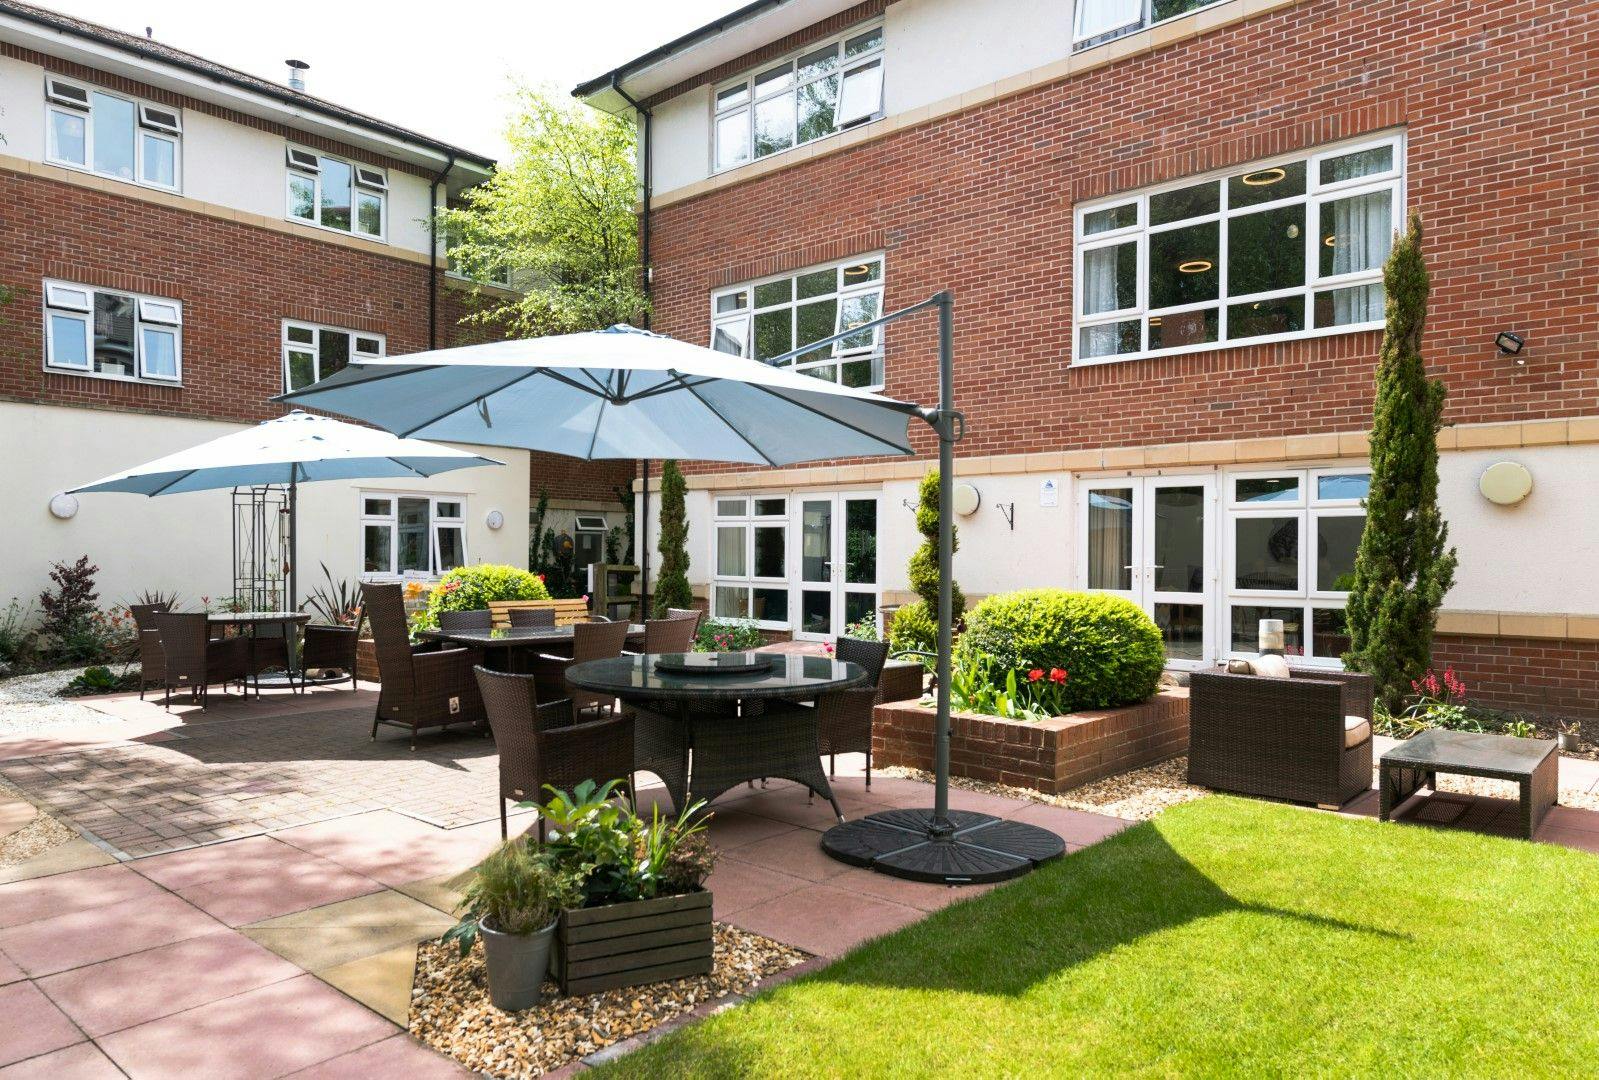 Garden at Ty Enfys Care Home in Cardiff, South Glamorgan